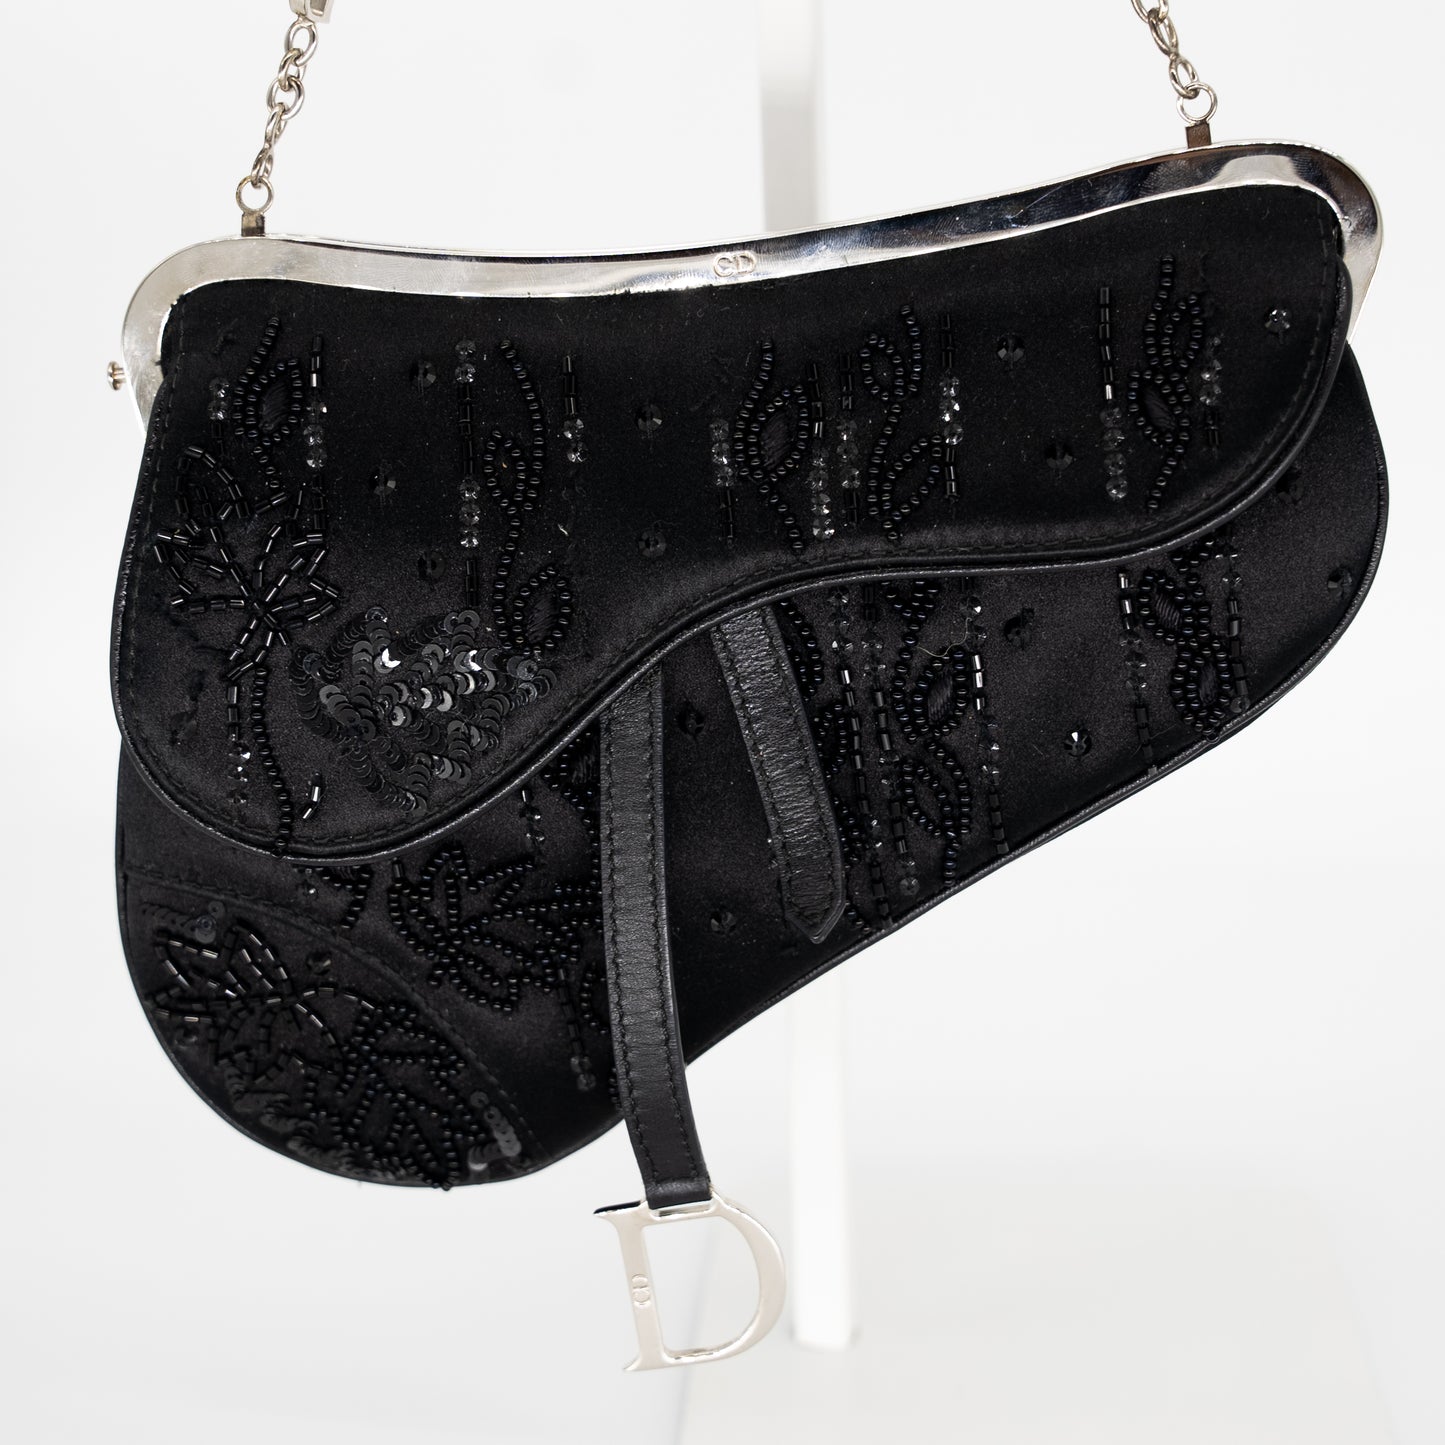 DIOR  HANDPAINTED AND BEADED MINI SADDLE BAG FROM THE